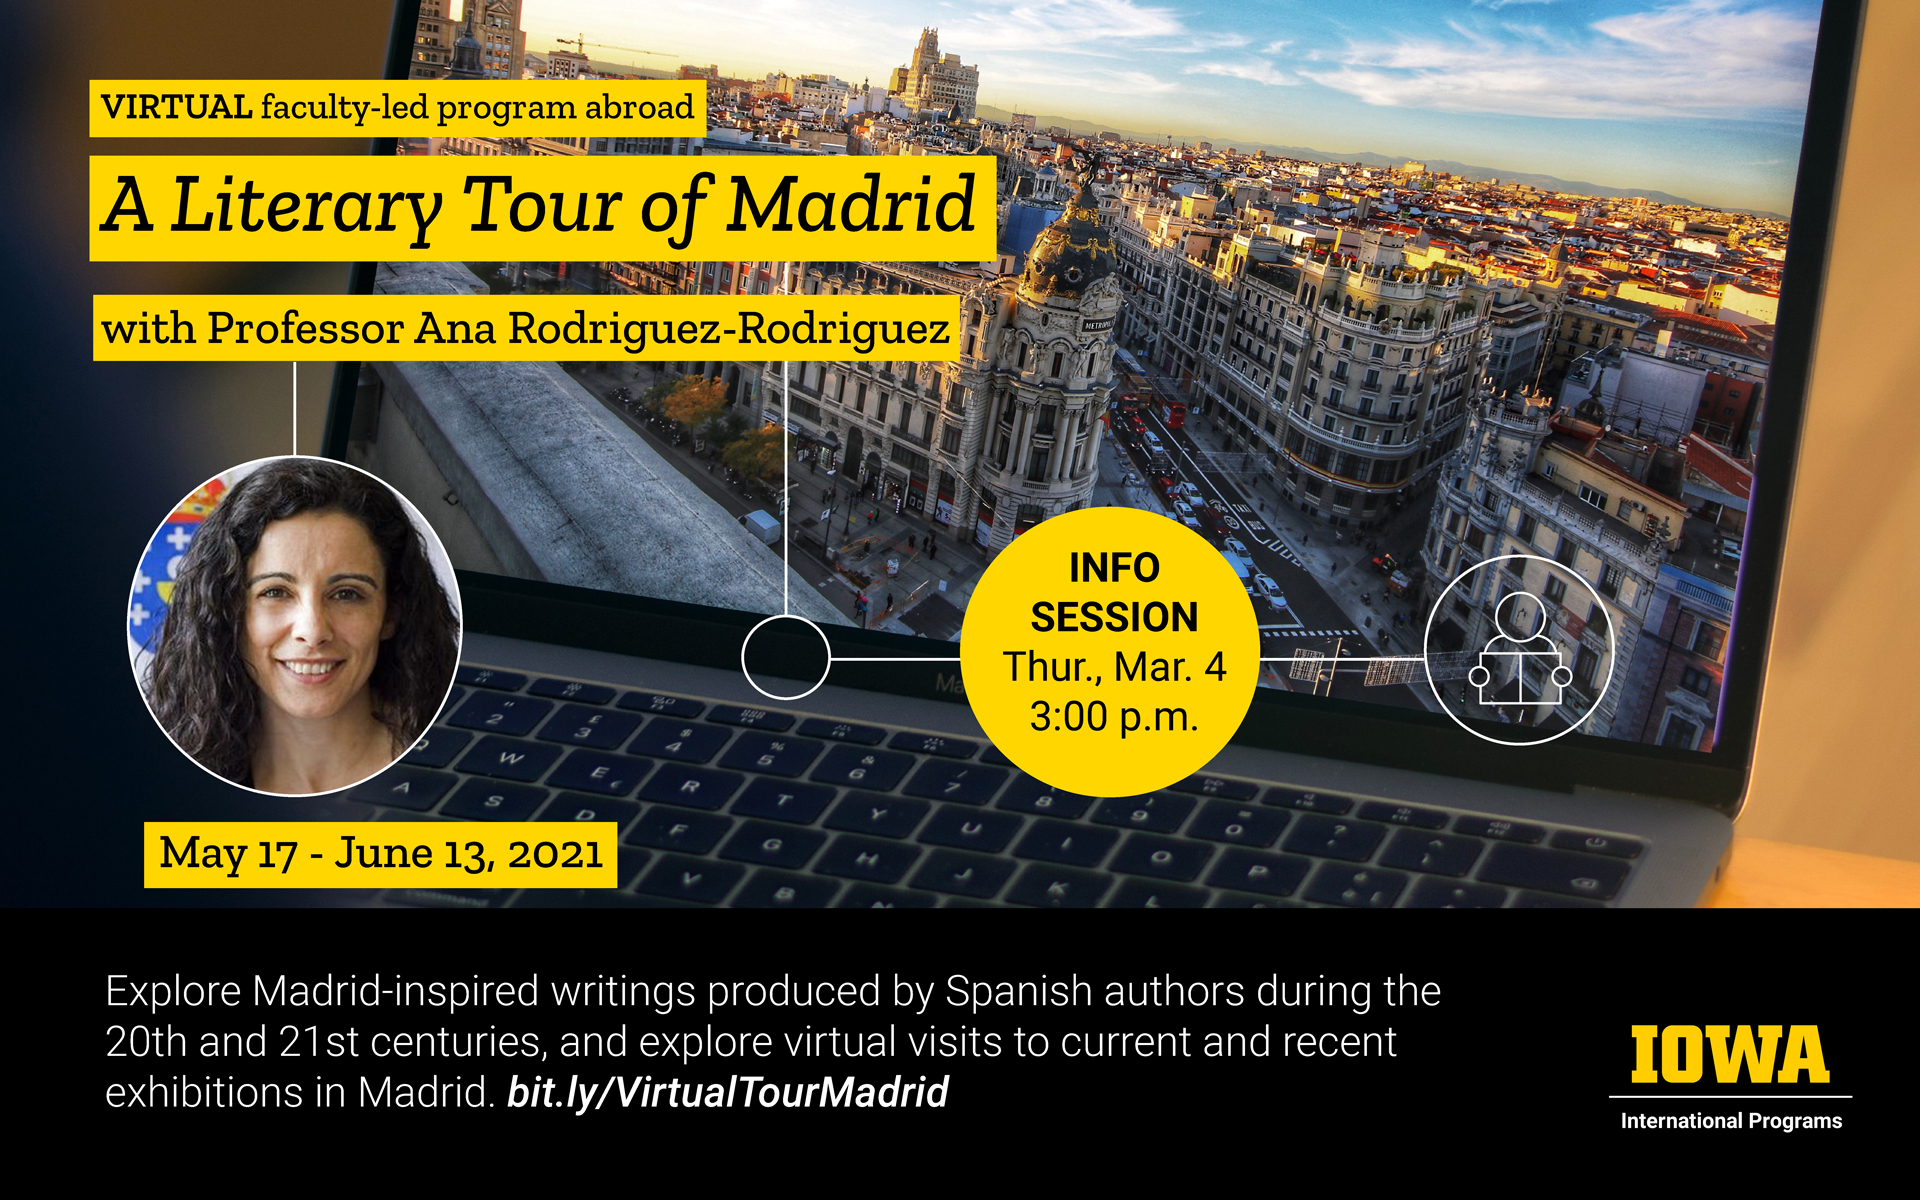 Virtual faculty-led program abroad A Literary Tour of Madrid with Professor Ana Rodriguez-Rodriguez happening May 17 through June 13, 2021. Info session Thursday March 4th, 2021 at 3:00pm. explore Madrid-inspired writings produced by Spanish authors during the 20th and 21st centuries, and explore virtual visits to current and recent exhibitions in Madrid. bit.ly/VirtualTourMadrid